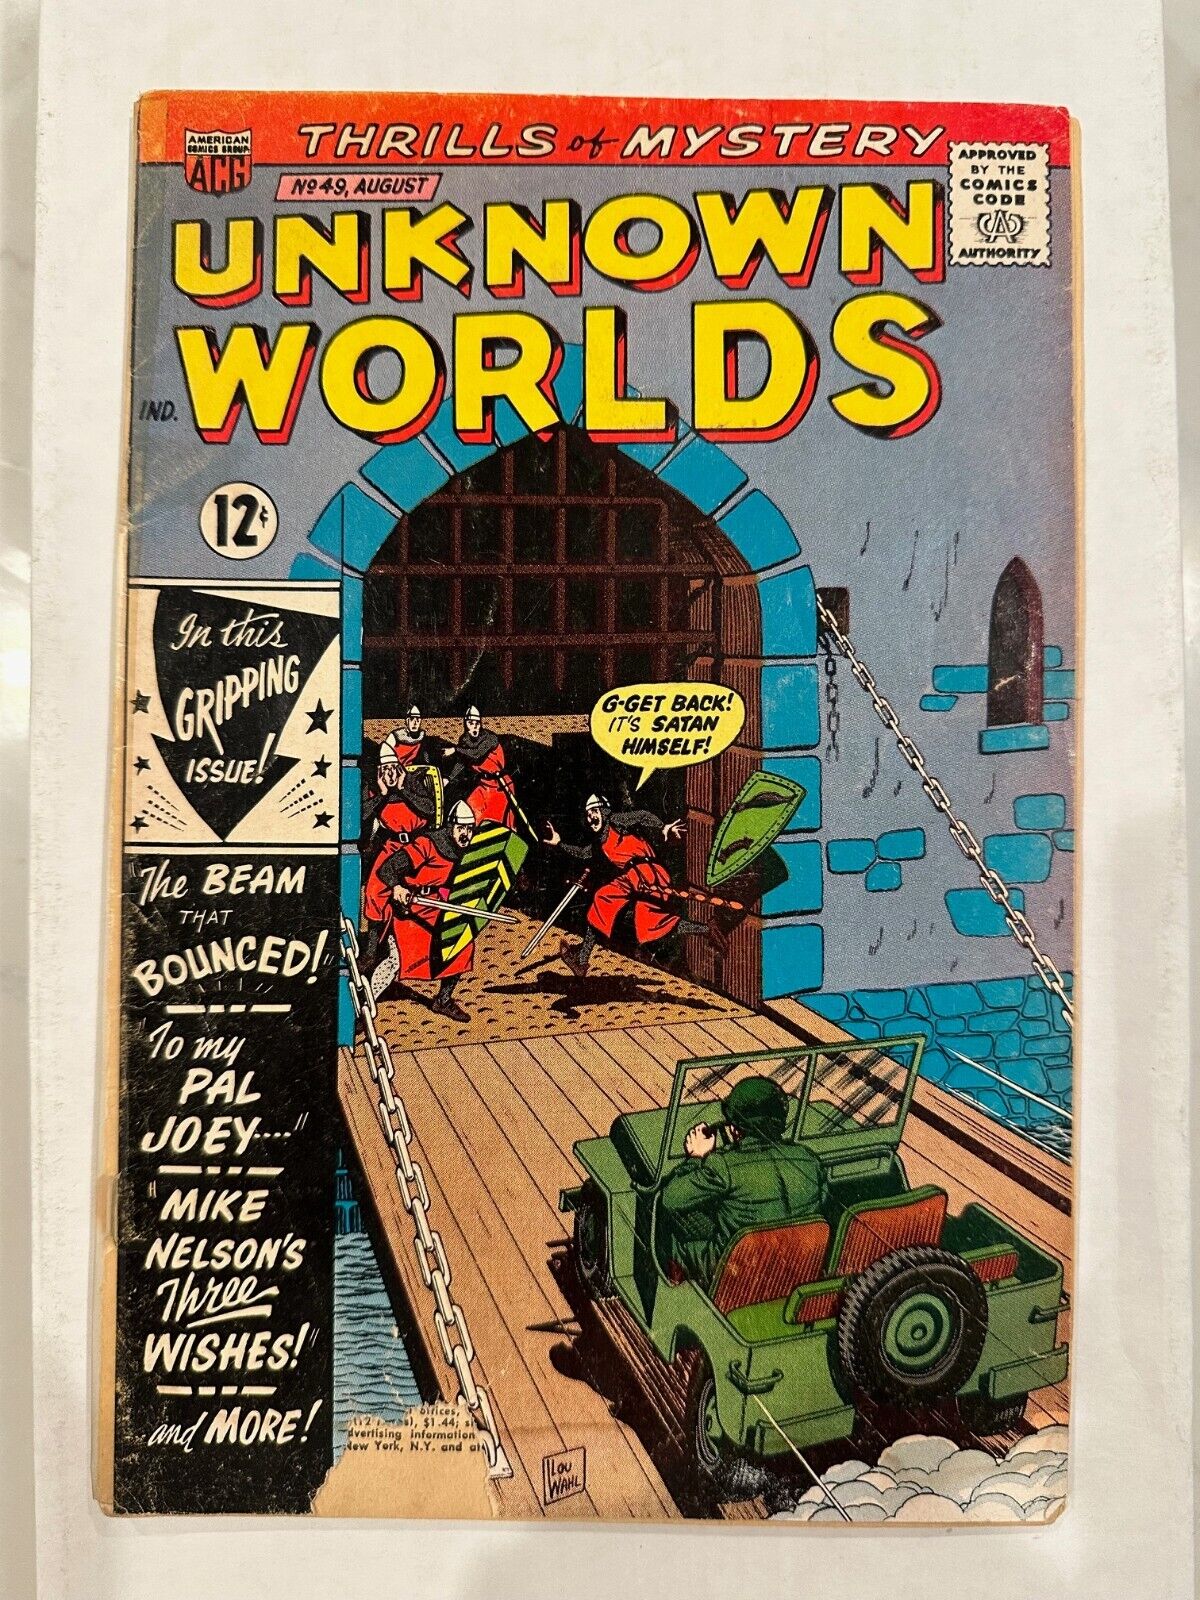 Unknown Worlds #49  Comic Book